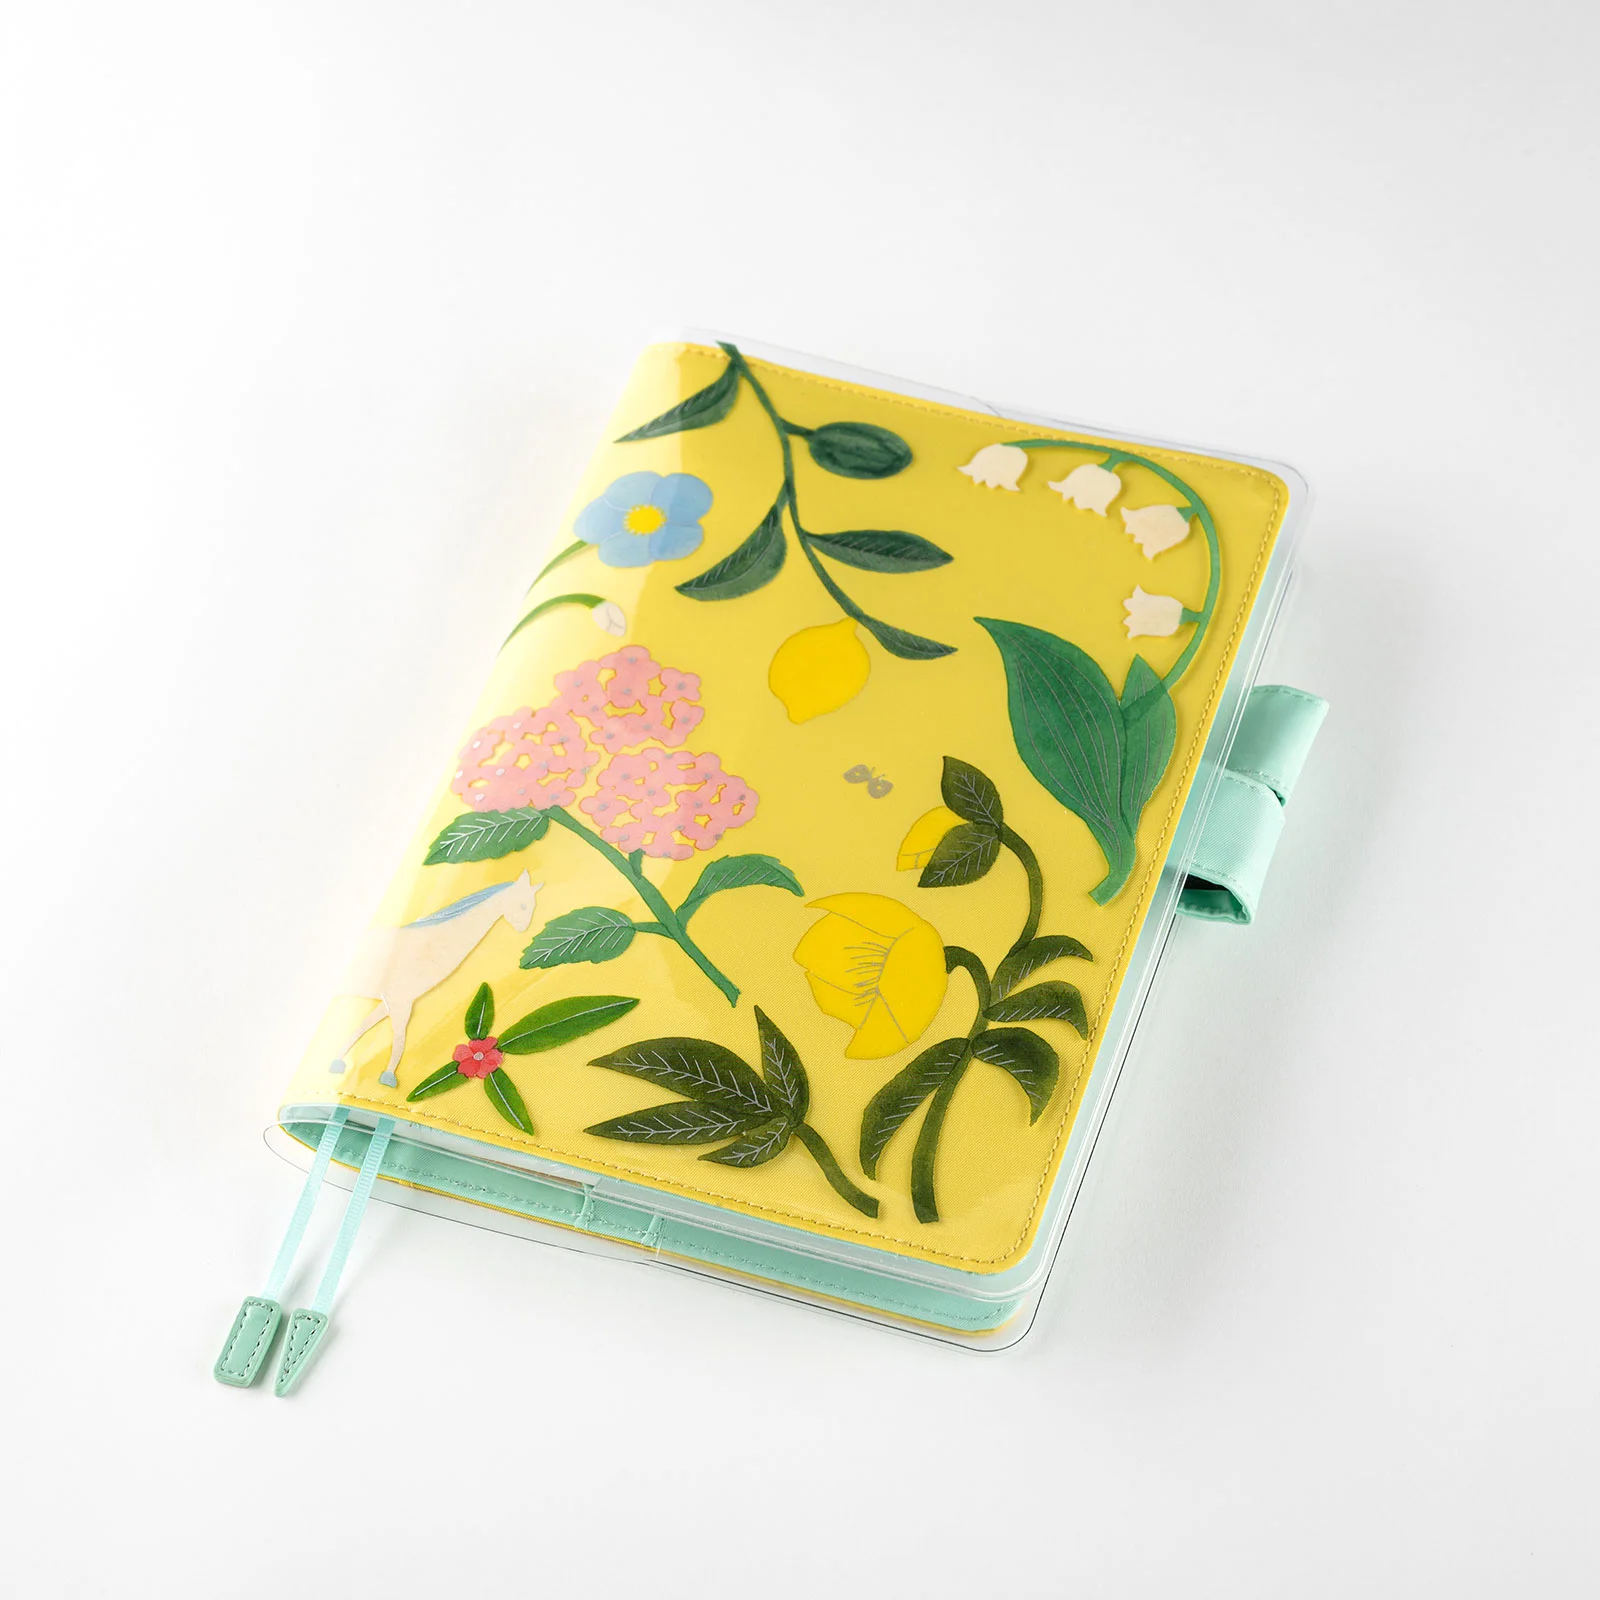 Hobonichi: Cover on Cover - Season of Hope by Yuka Hiiragi for A5 Size -  Accessories Lineup - Accessories - Hobonichi Techo 2024